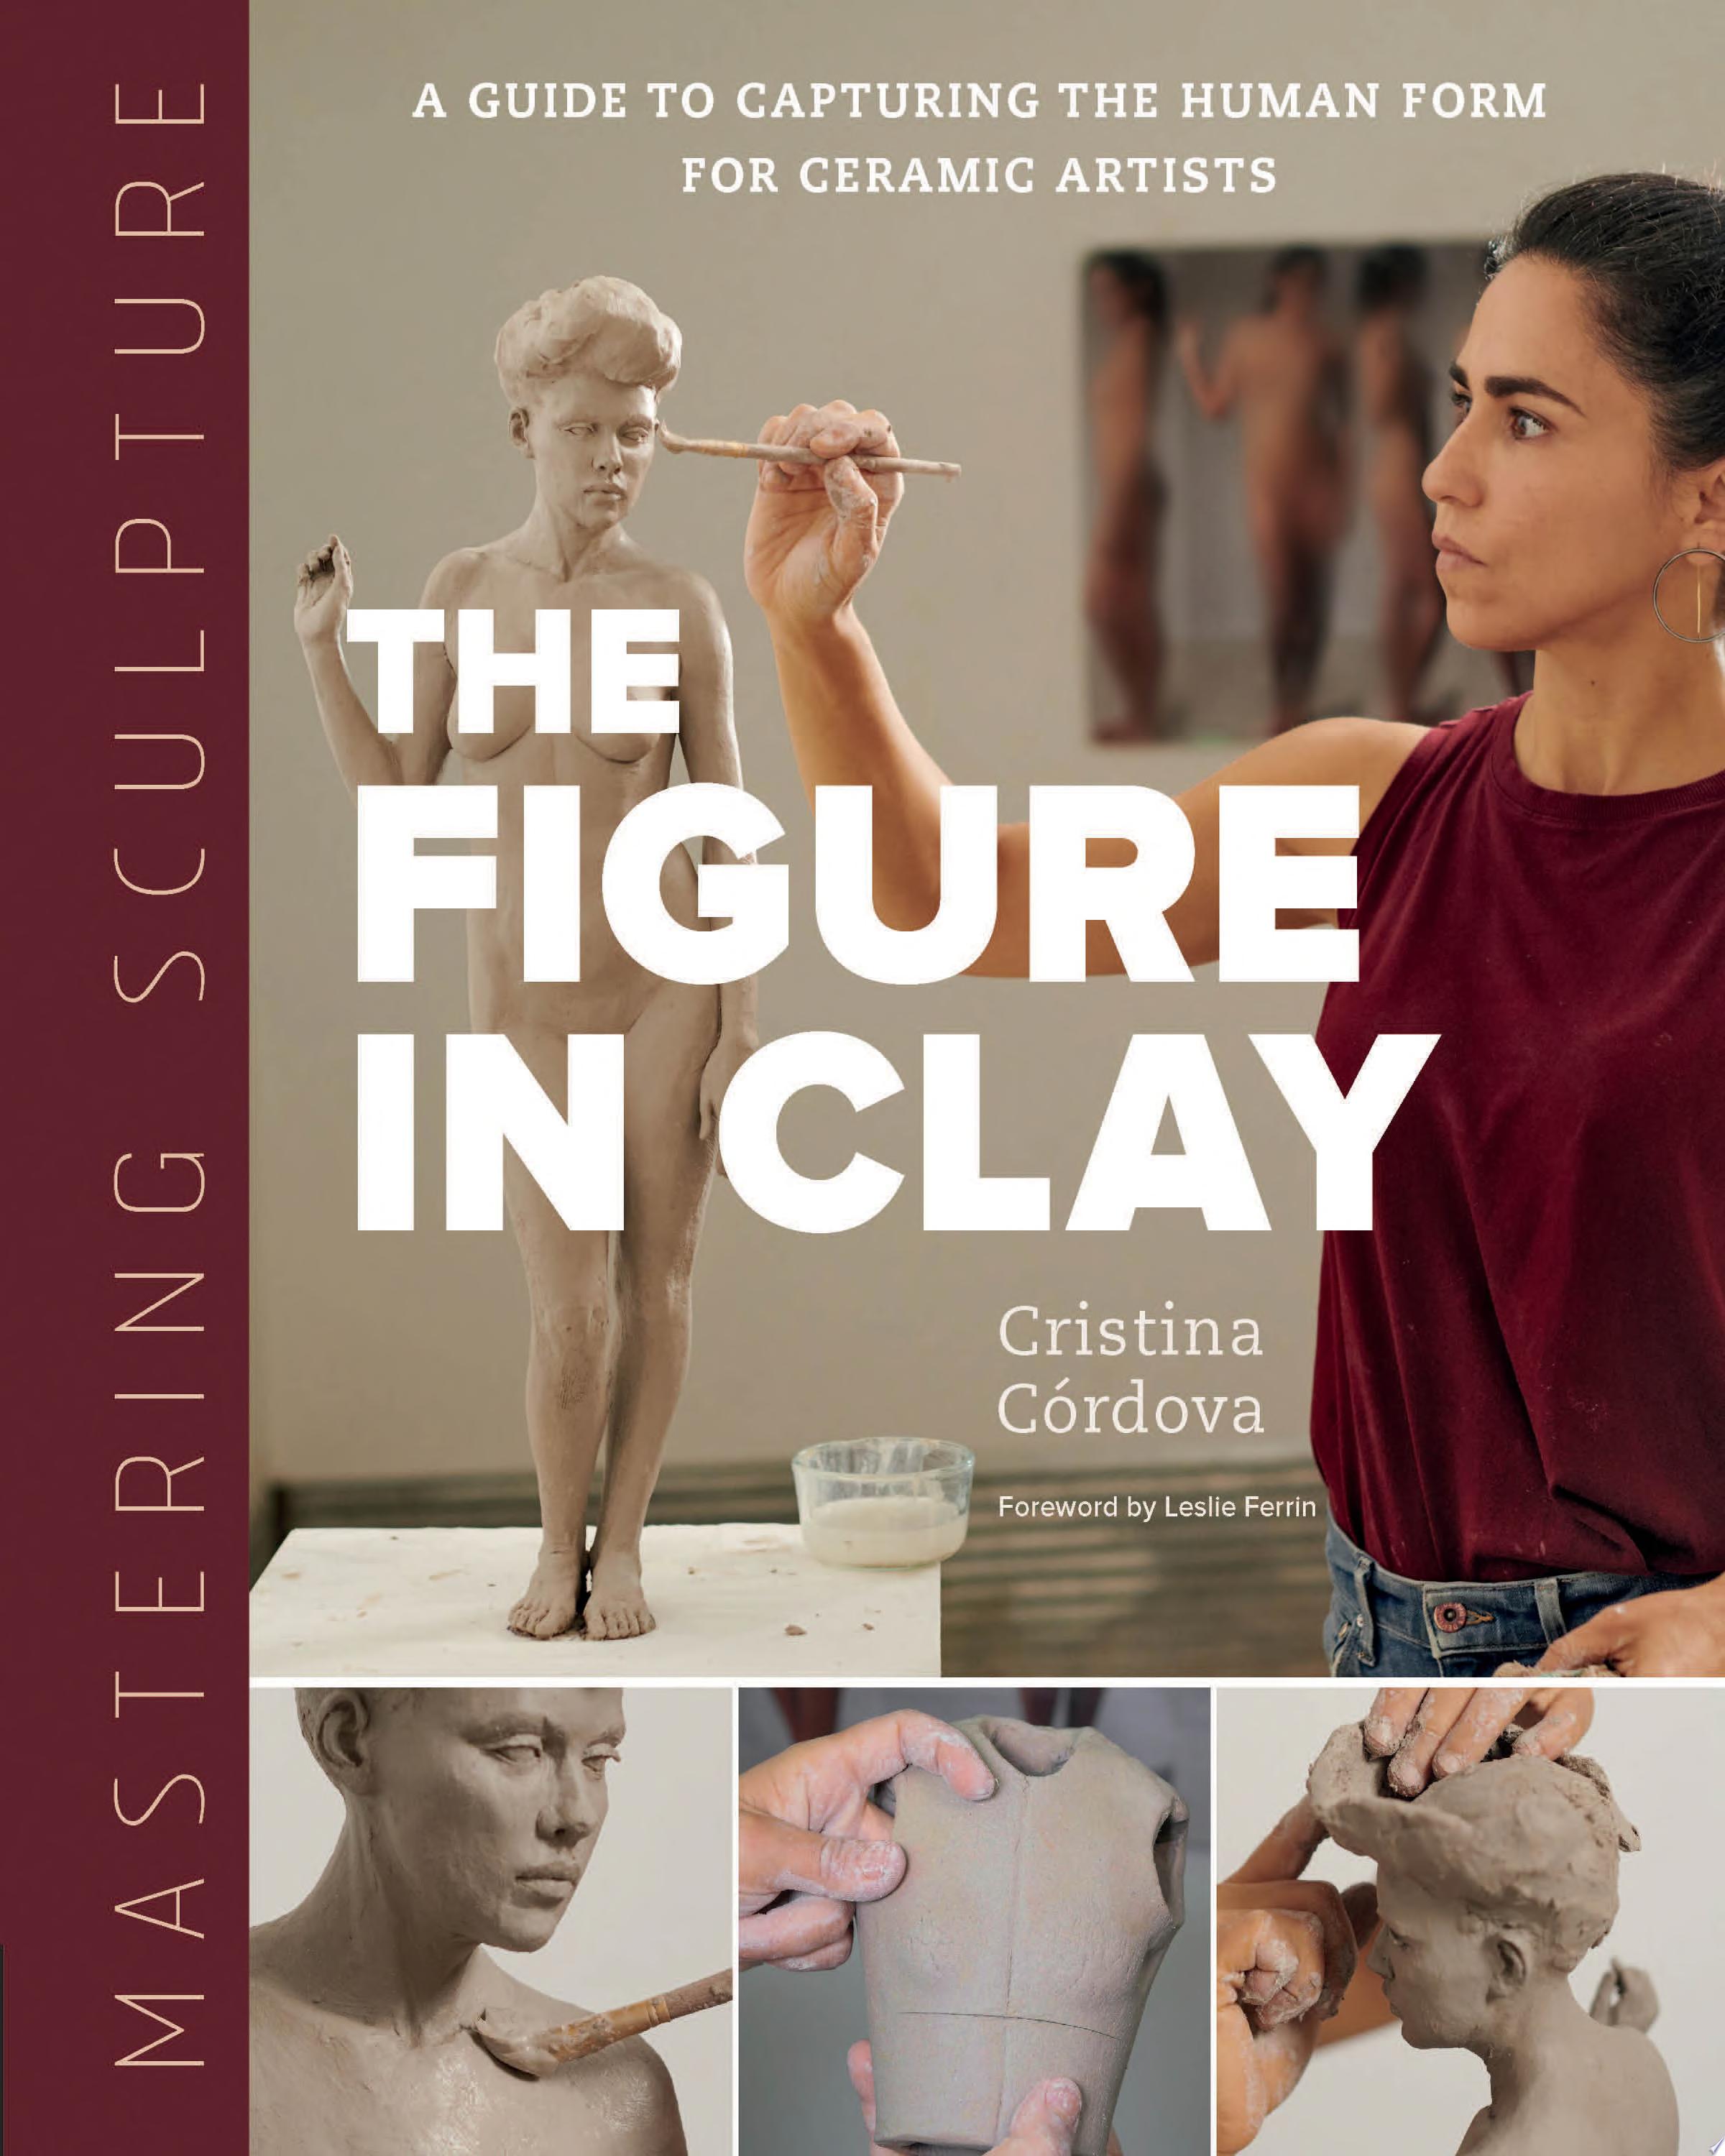 Image for "Mastering Sculpture: The Figure in Clay"